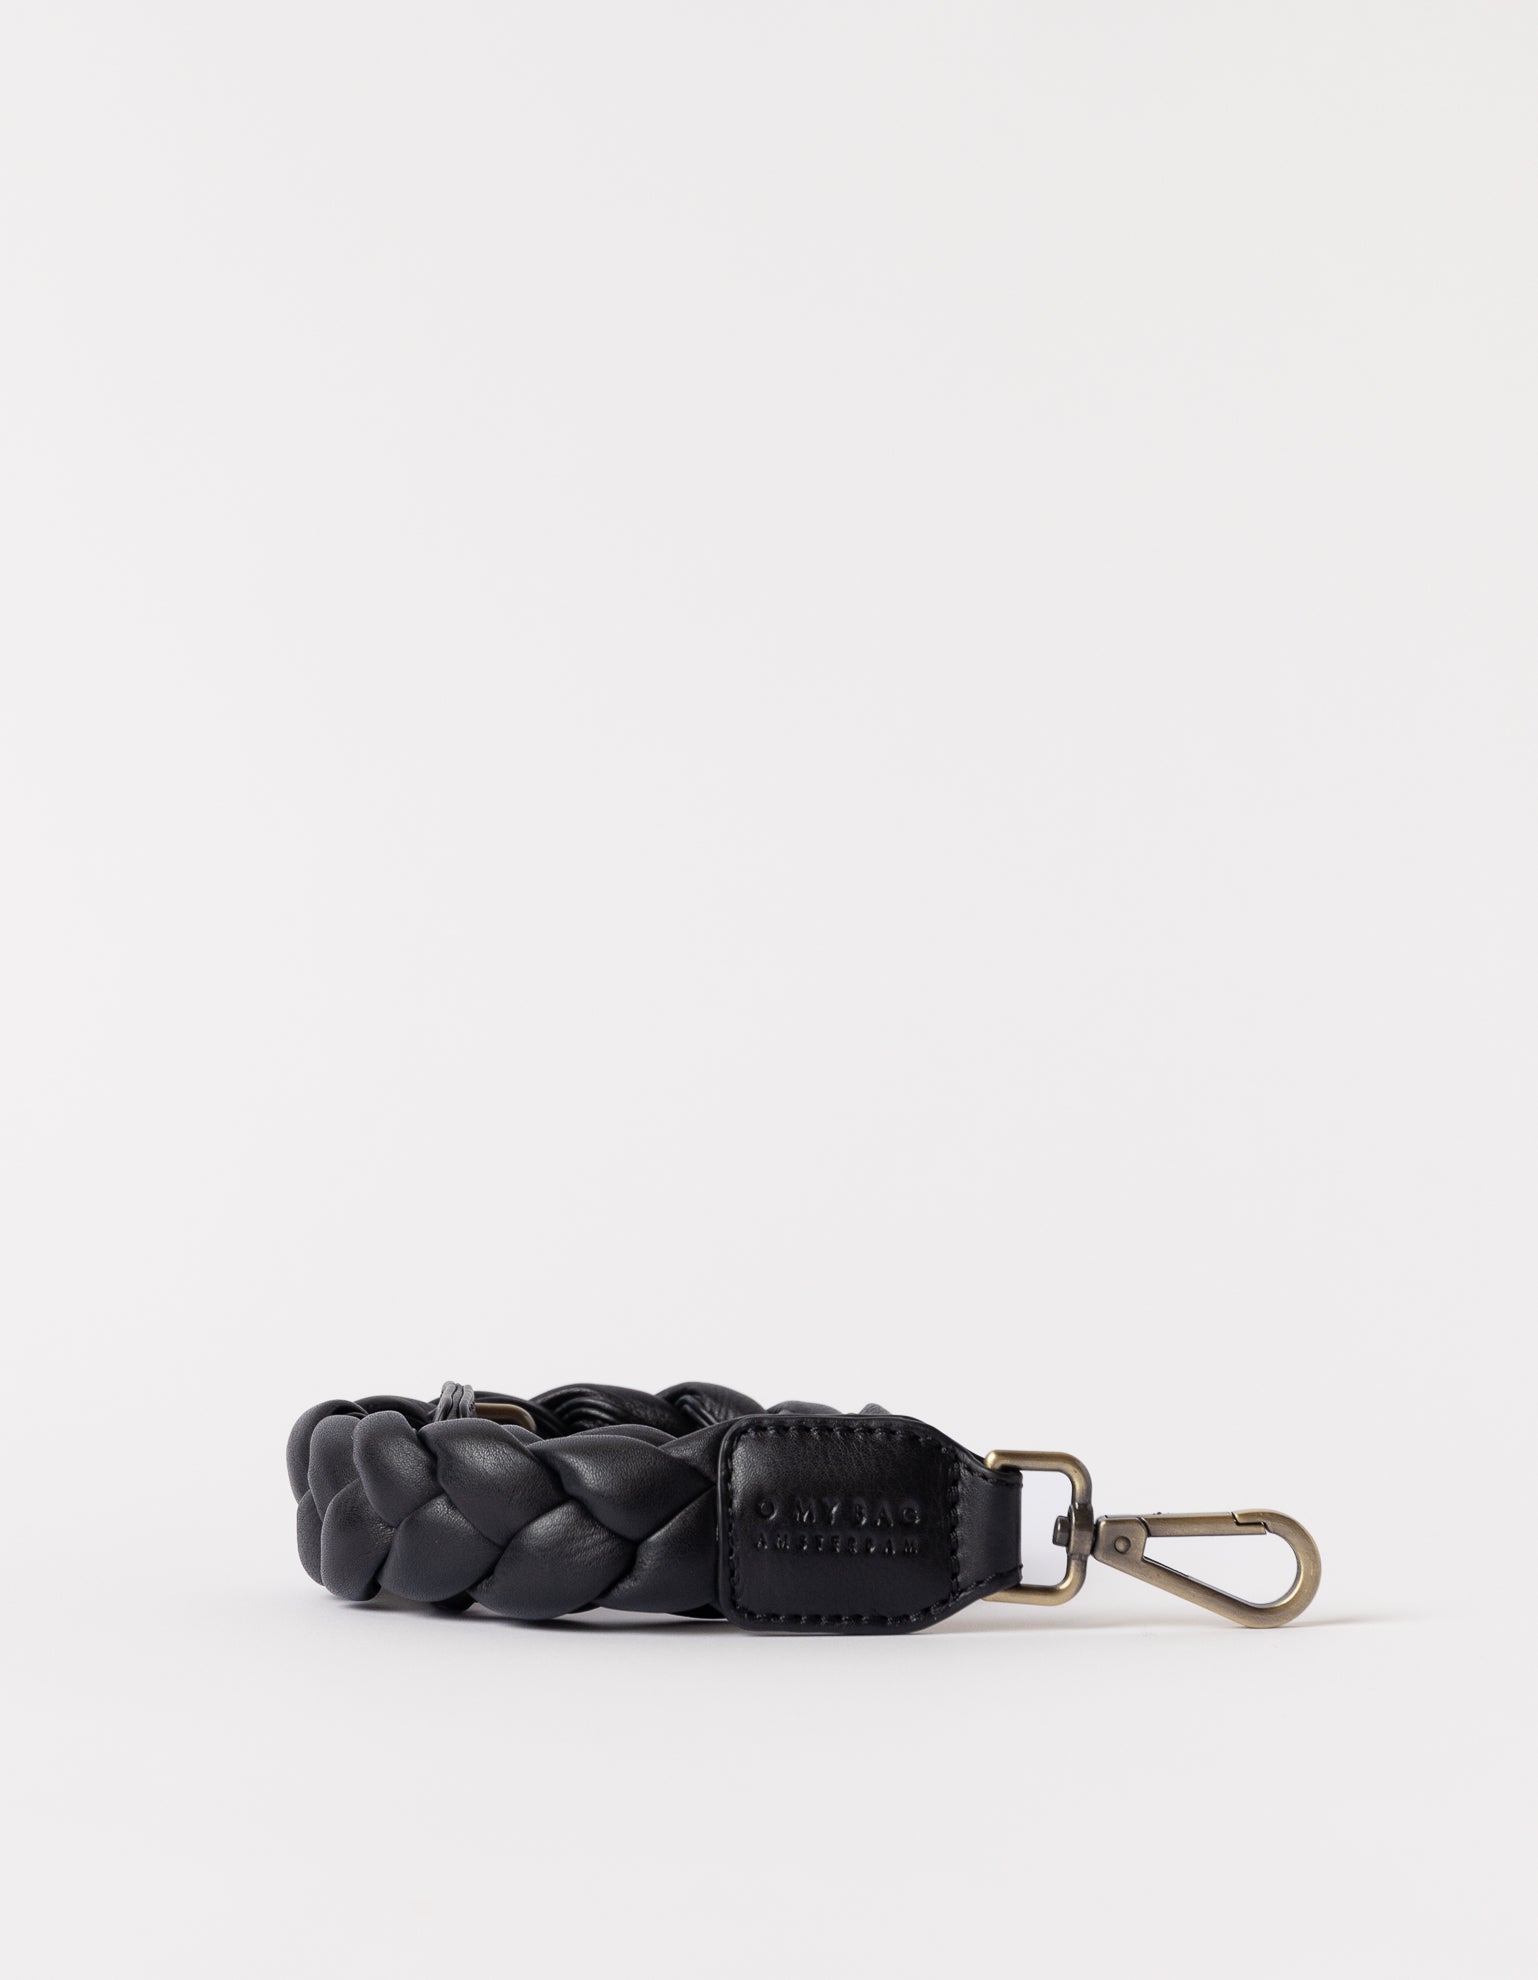 Braided soft grain shoulder strap - rolled product image